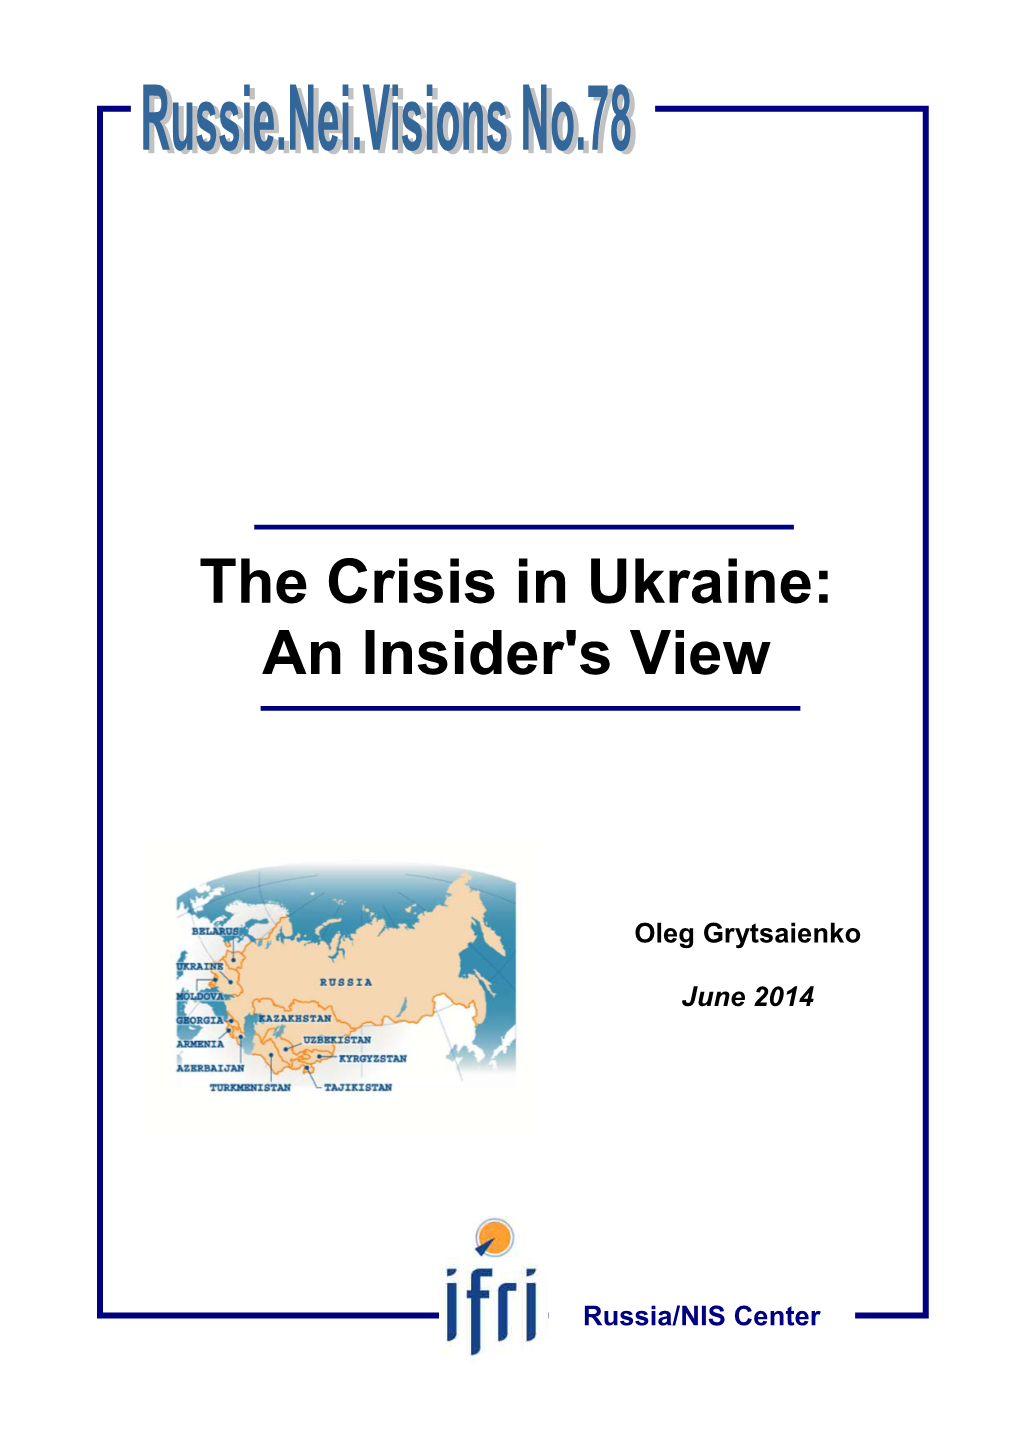 The Crisis in Ukraine: an Insider's View